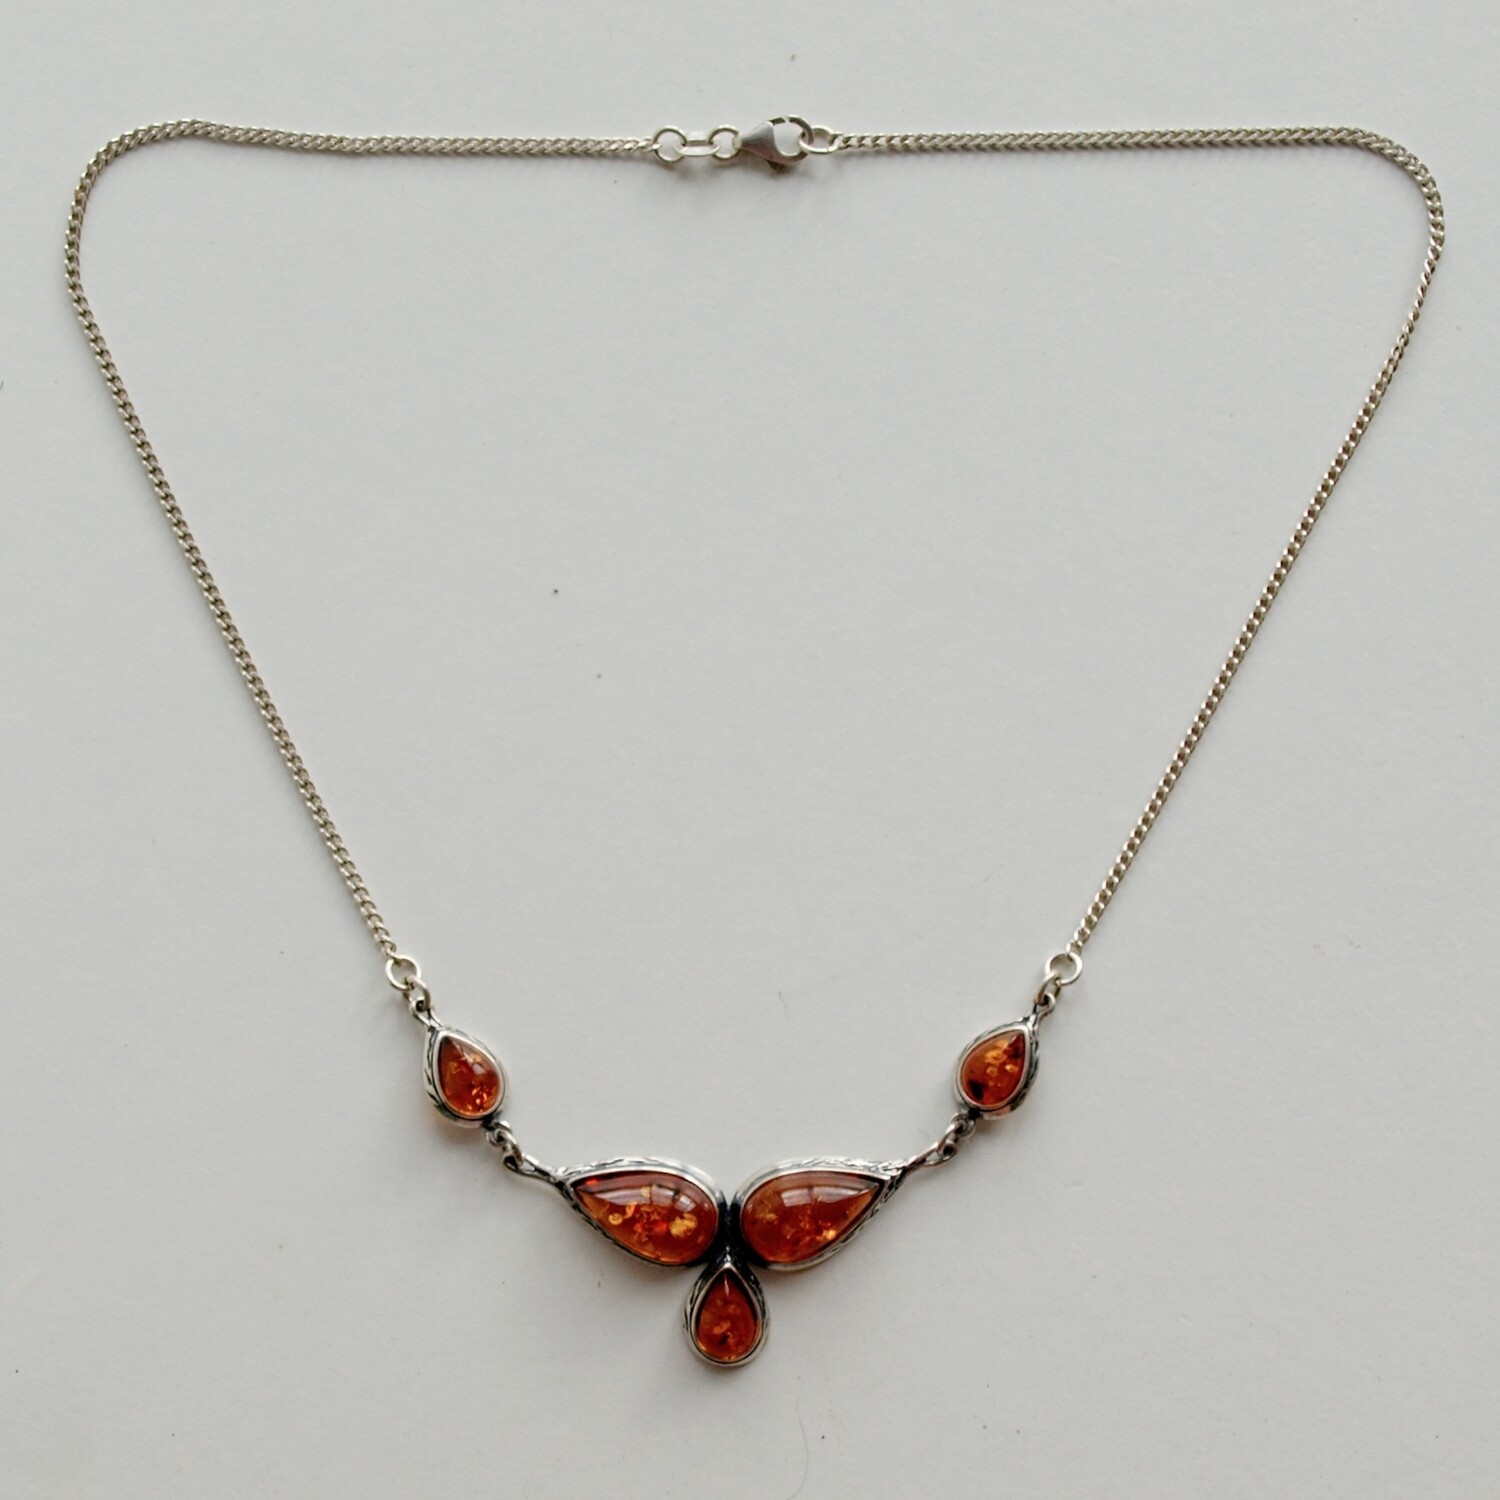 Ladies Solid Silver & Baltic Amber Necklace